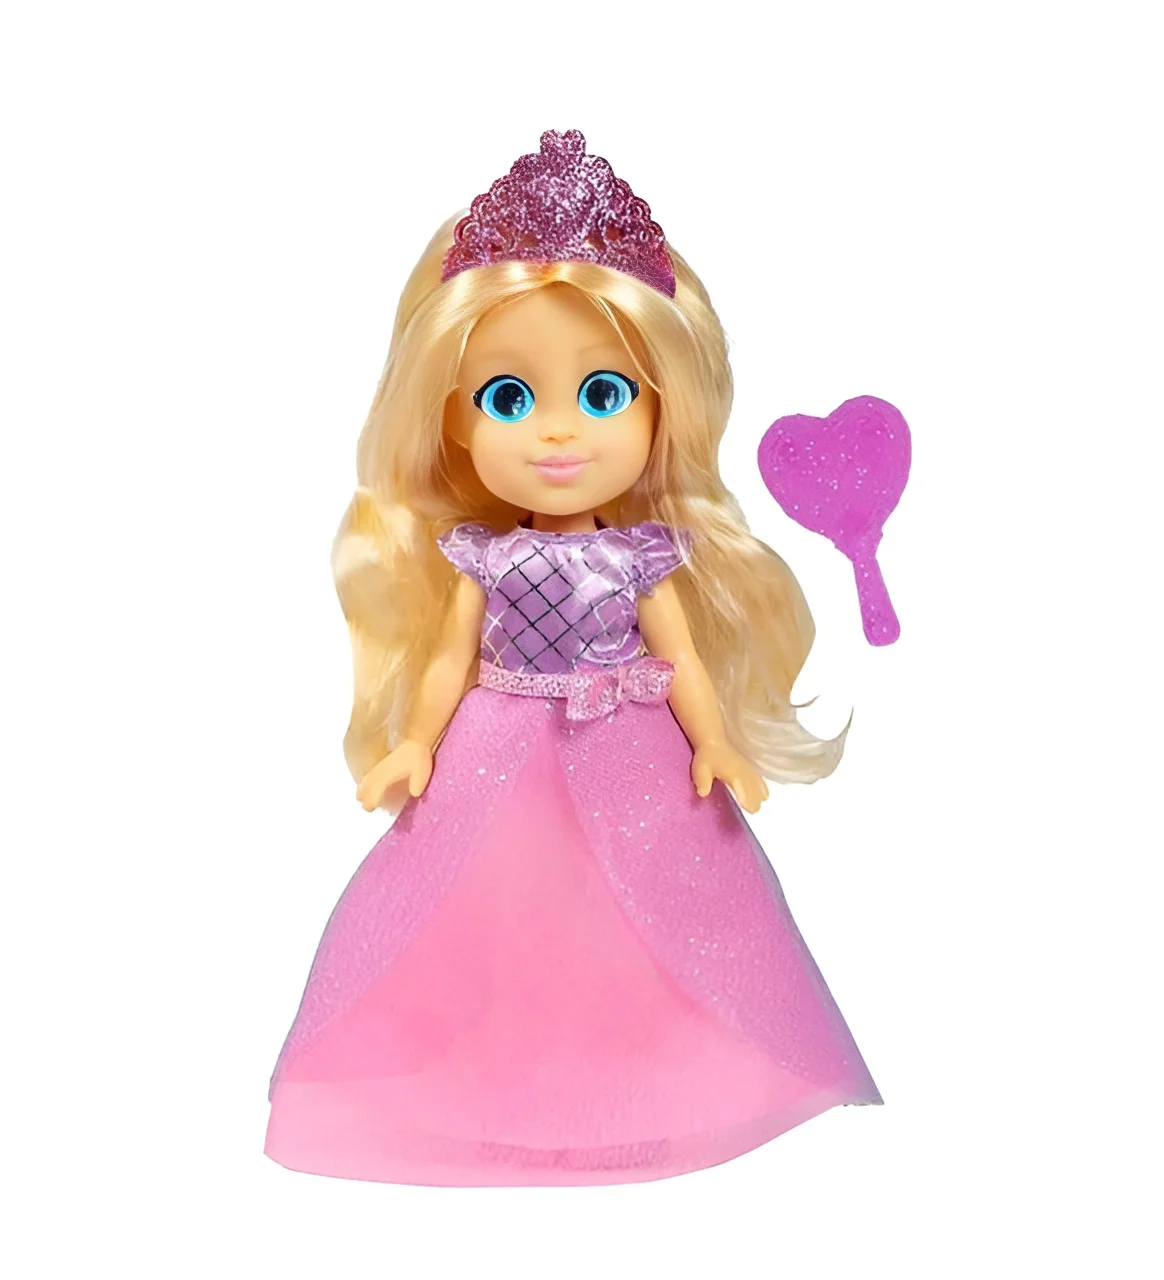 Love Diana Cloth Doll 15 Cm Toy Children Toy Mom & Kids Profession Groups Doctor Princess And Birthday Baby Fun Game diana princess of wales tribute 2 cd